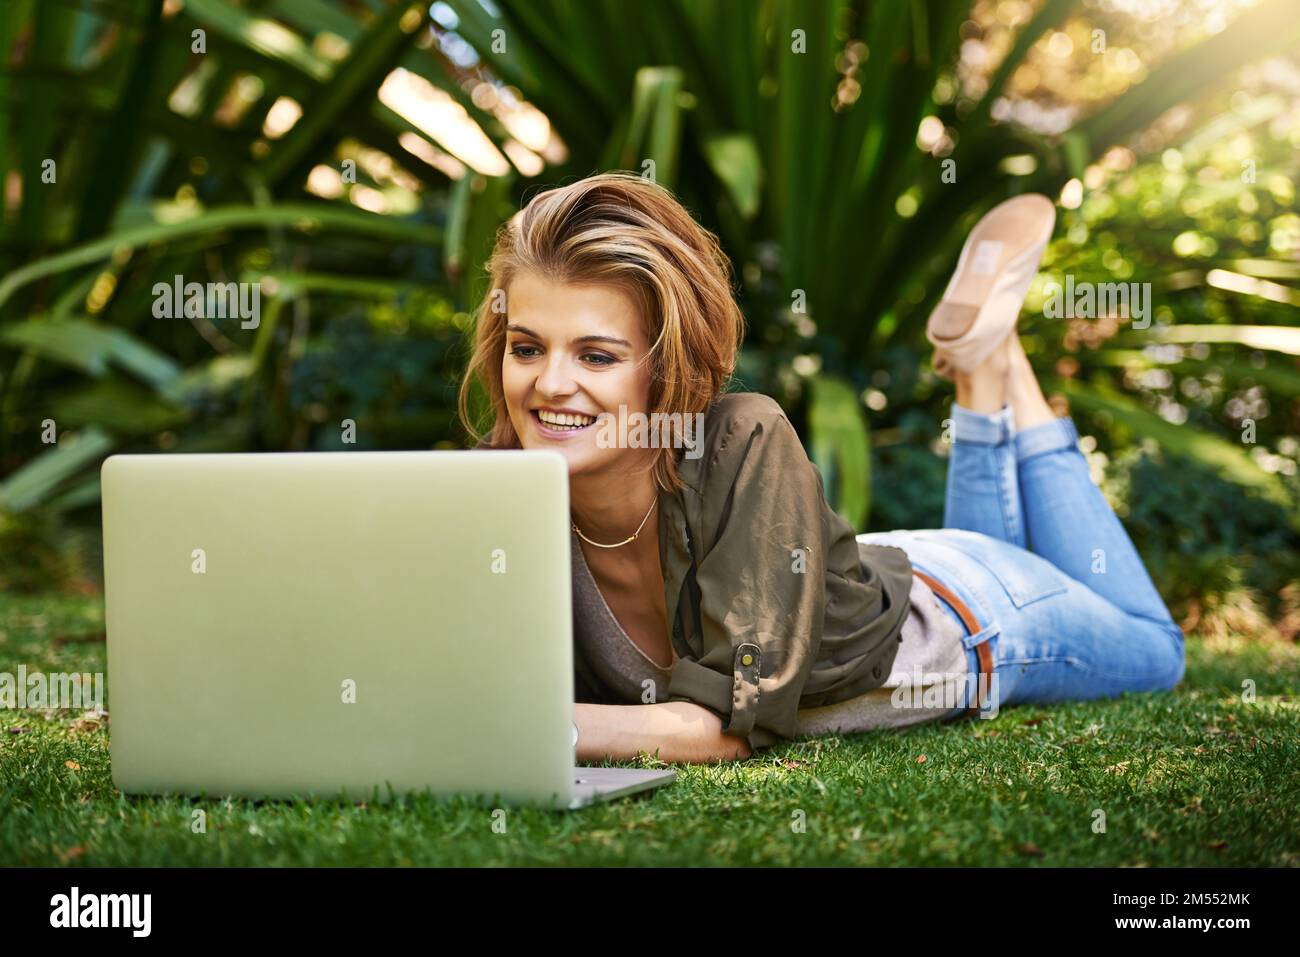 Blogging on the grass. an attractive young woman using her laptop while outside on the grass. Stock Photo